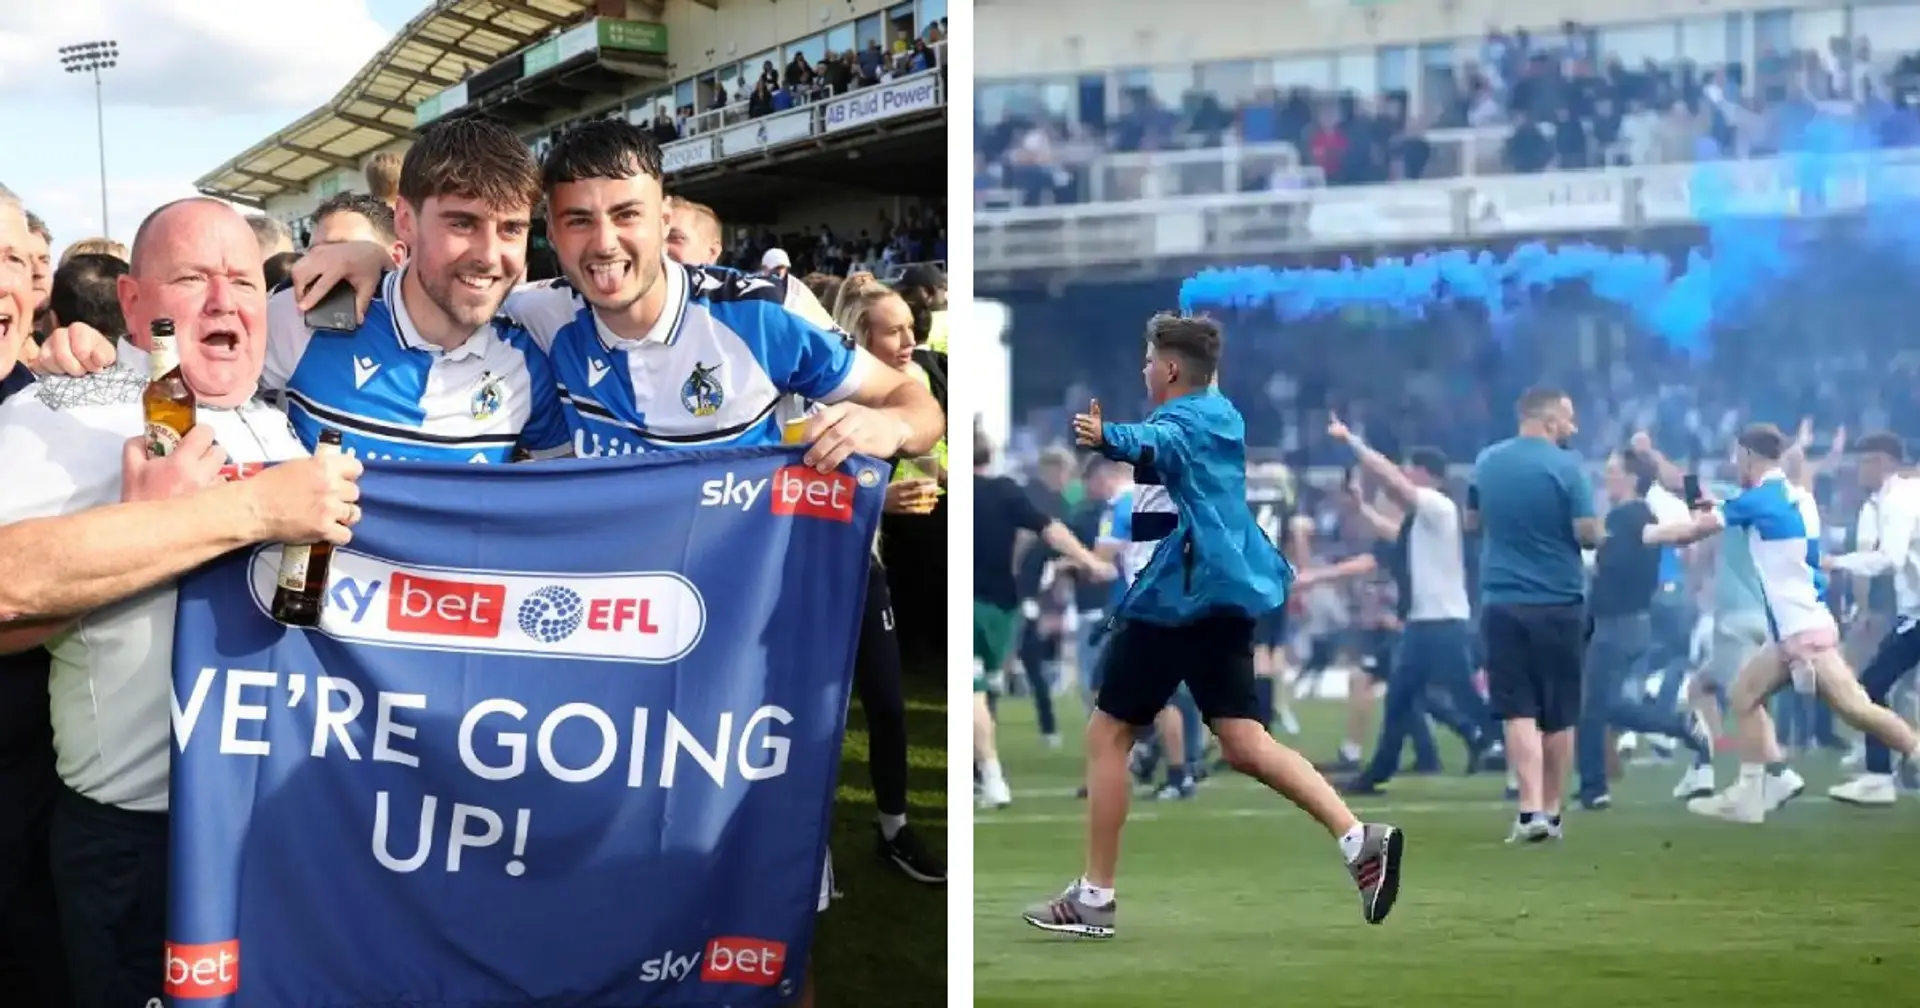 Miraculous turnaround: Bristol Rovers needed 7 goal win to secure final day promotion - they go on to win 7-0